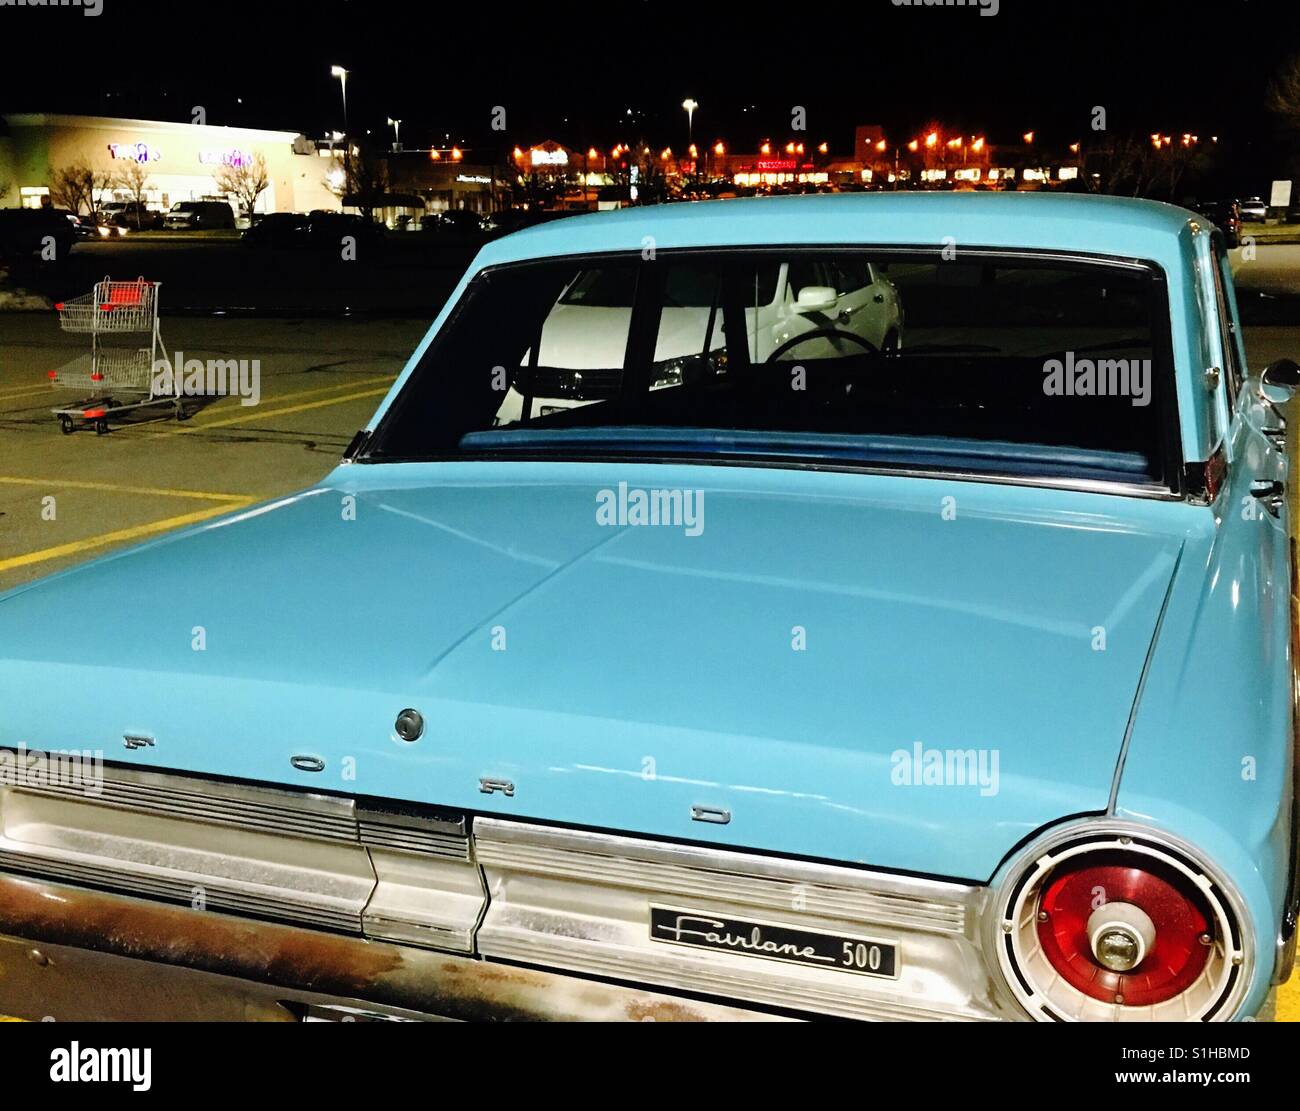 Aqua blue Ford Fairlane car 1960's in parking lot at night Stock Photo